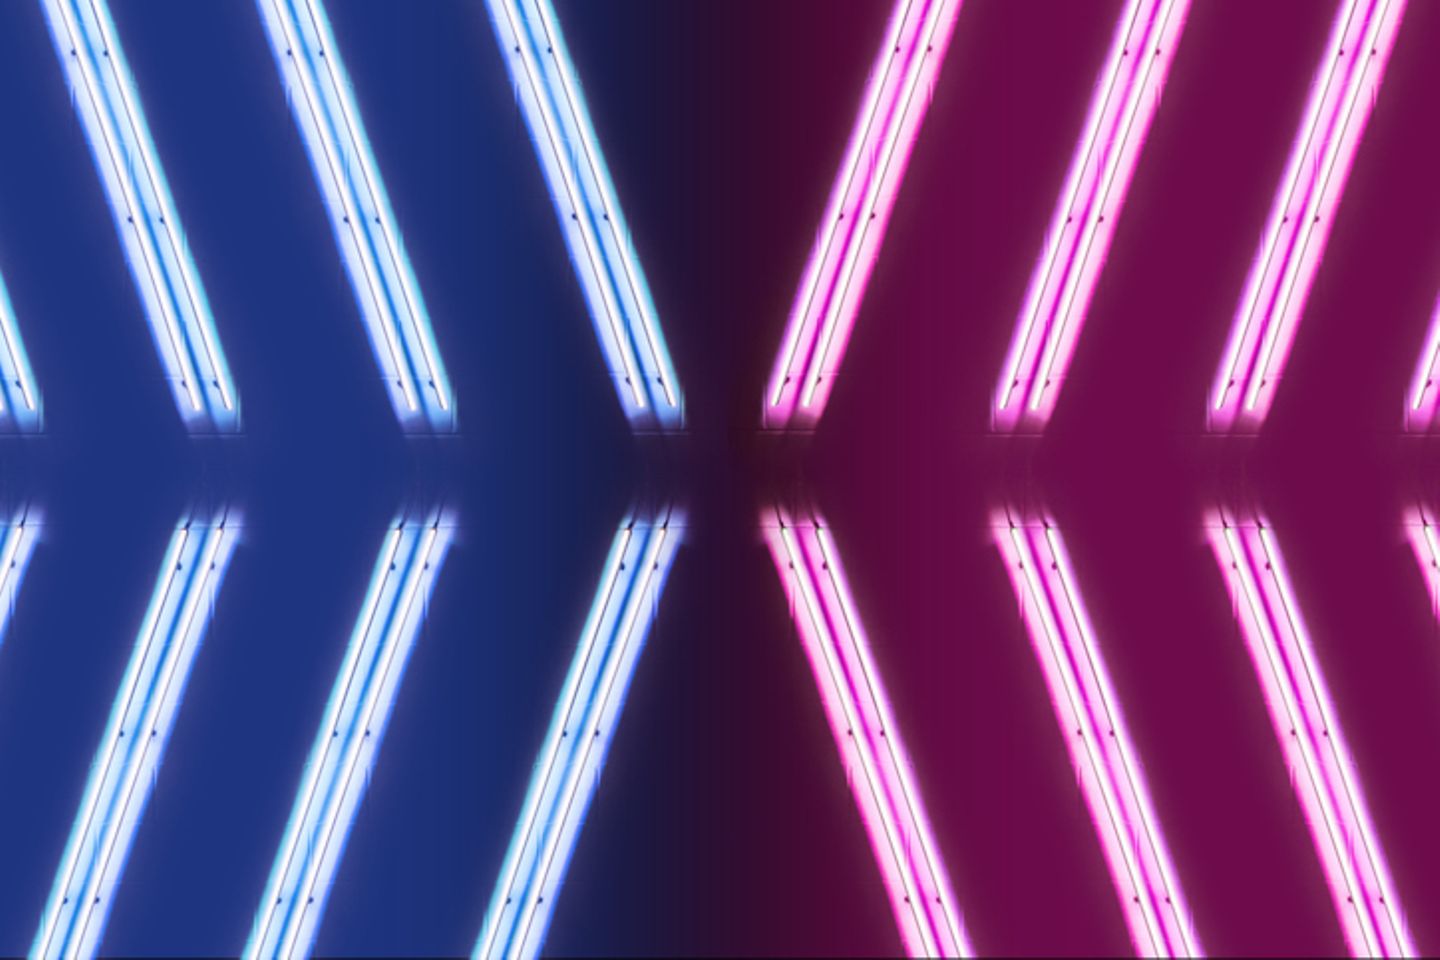 Blue and pink neon tubes which converge towards each other in an arrow shape